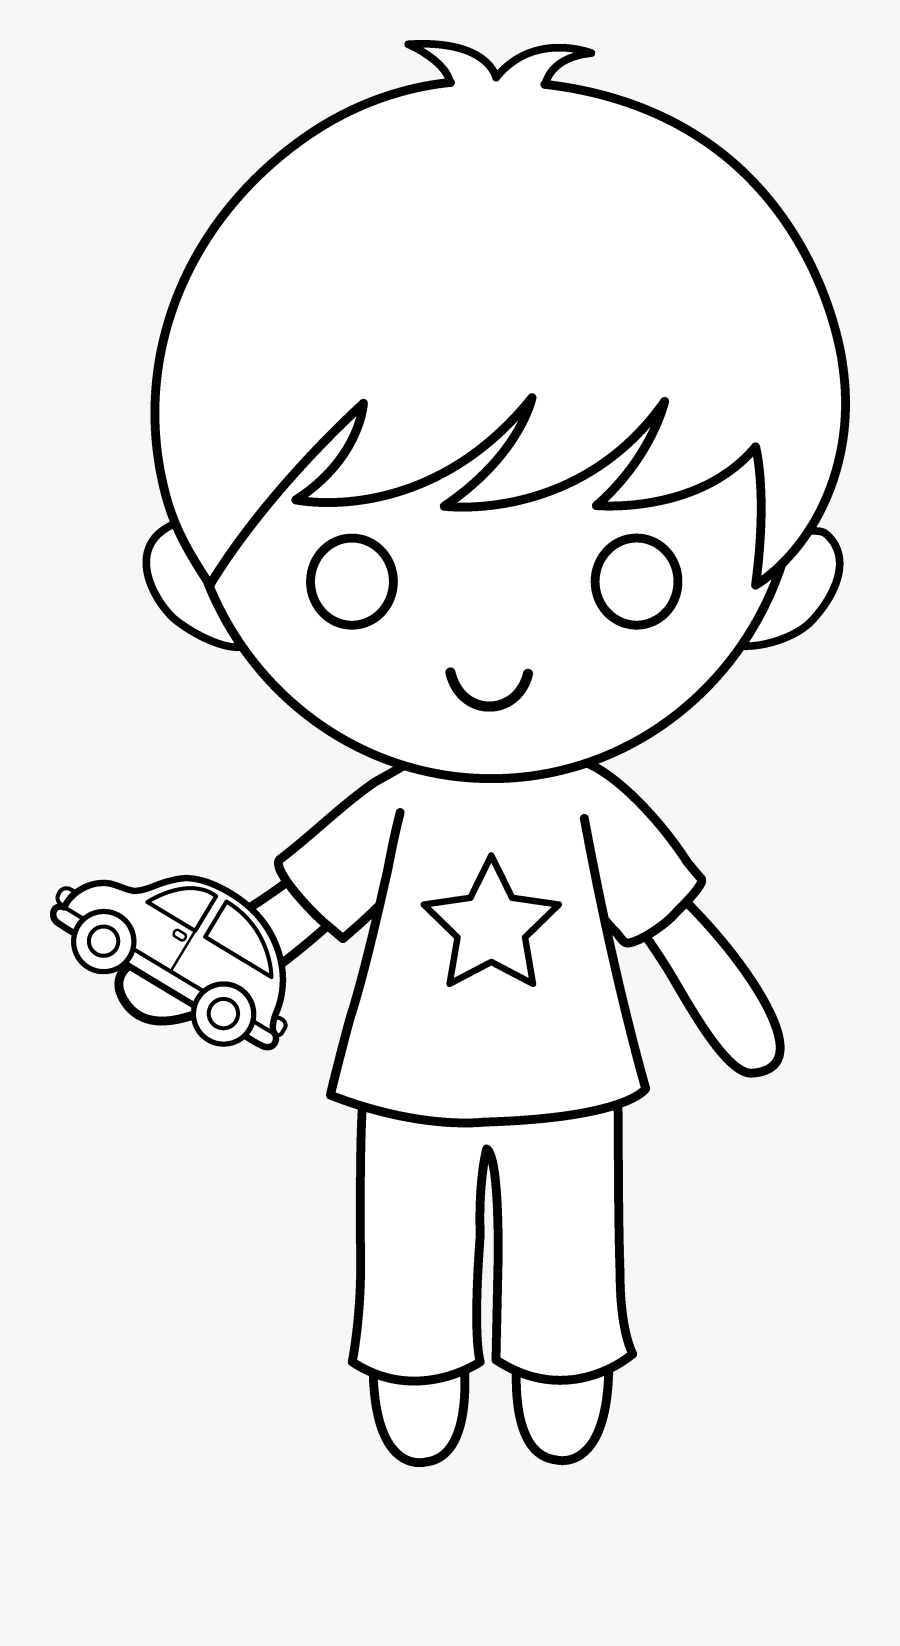 Boy With Toy Car Coloring Page - Coloring Book, Transparent Clipart